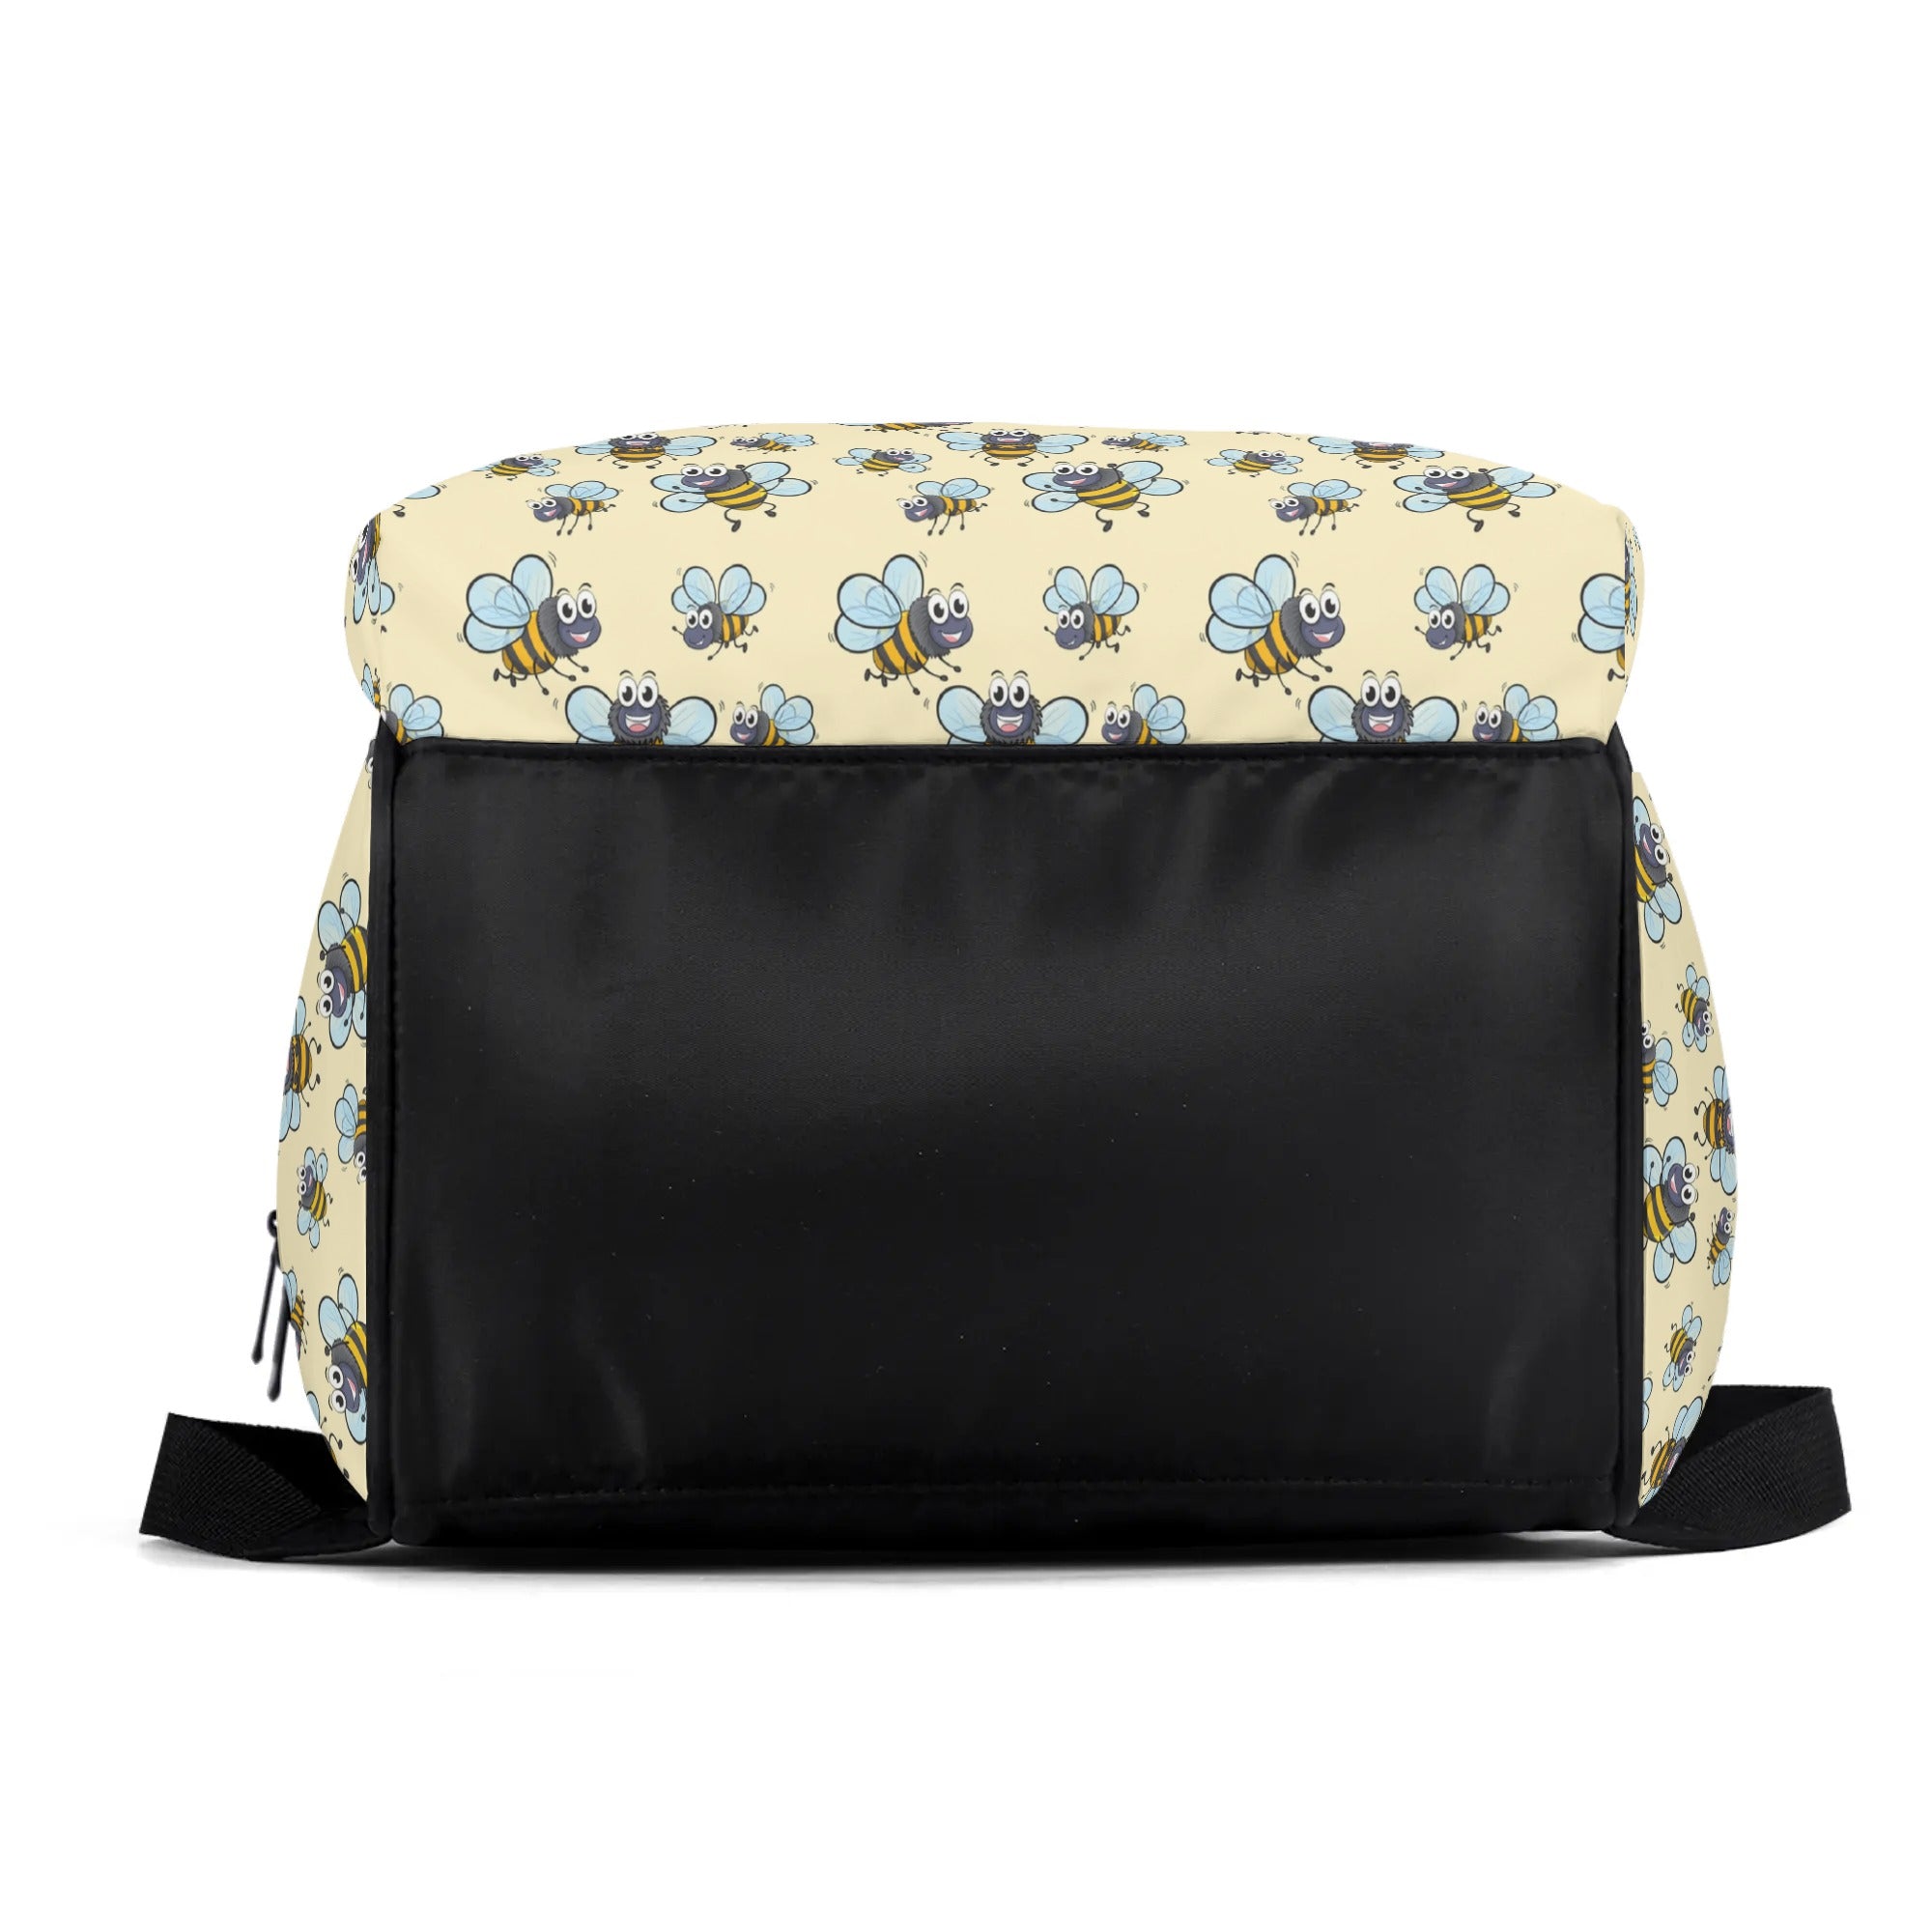 Large Capacity Diaper Backpack - Busy Little Bees